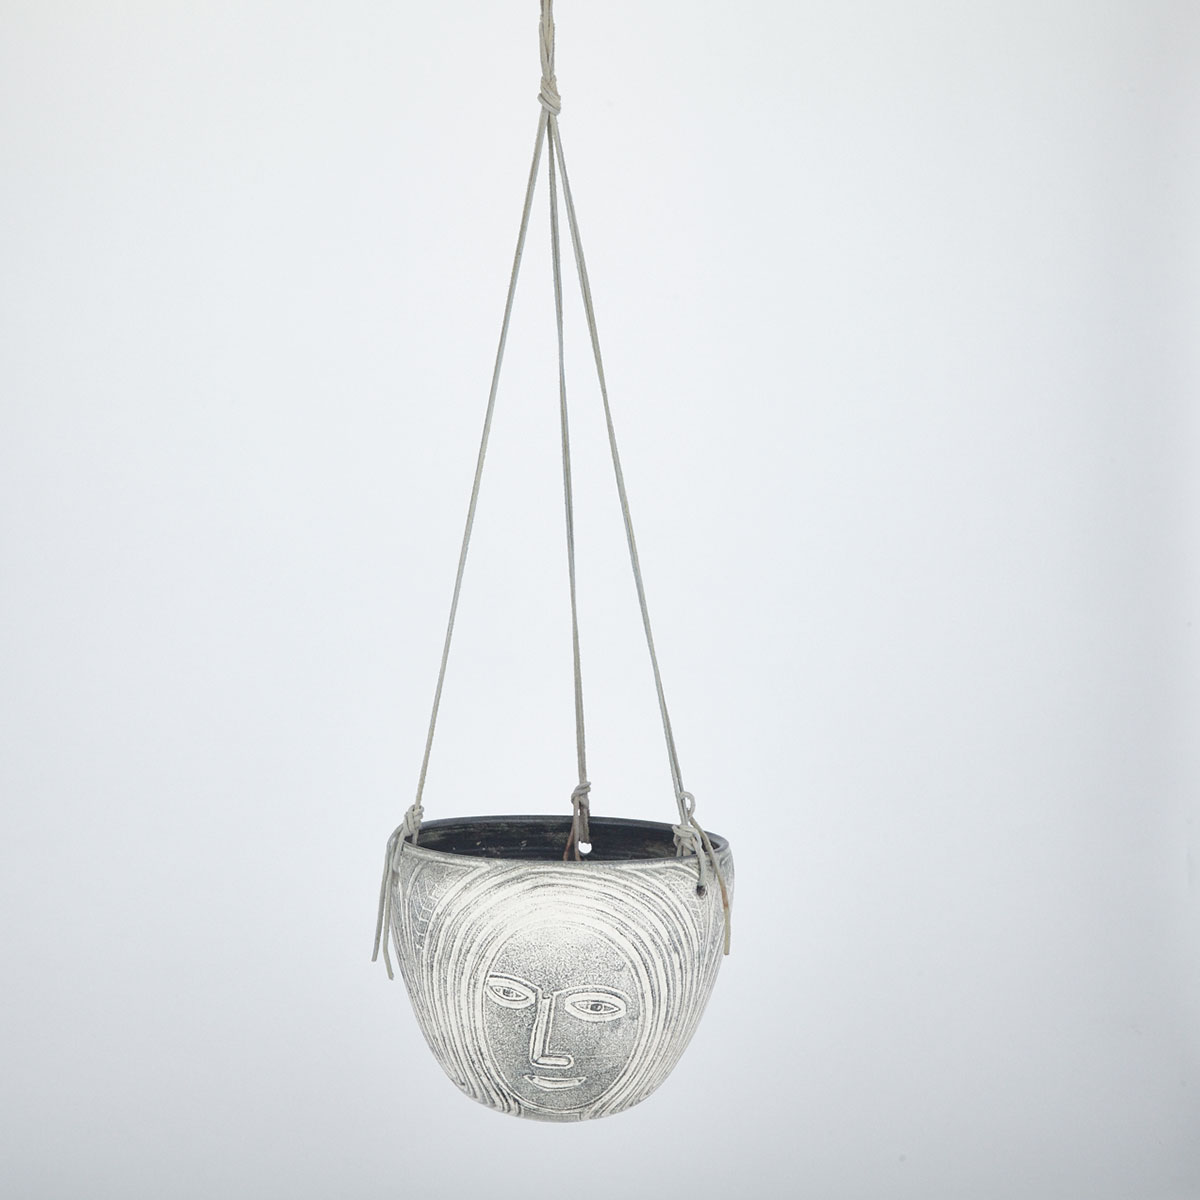 Brooklin Pottery Hanging Planter, Theo and Susan Harlander, c.1970